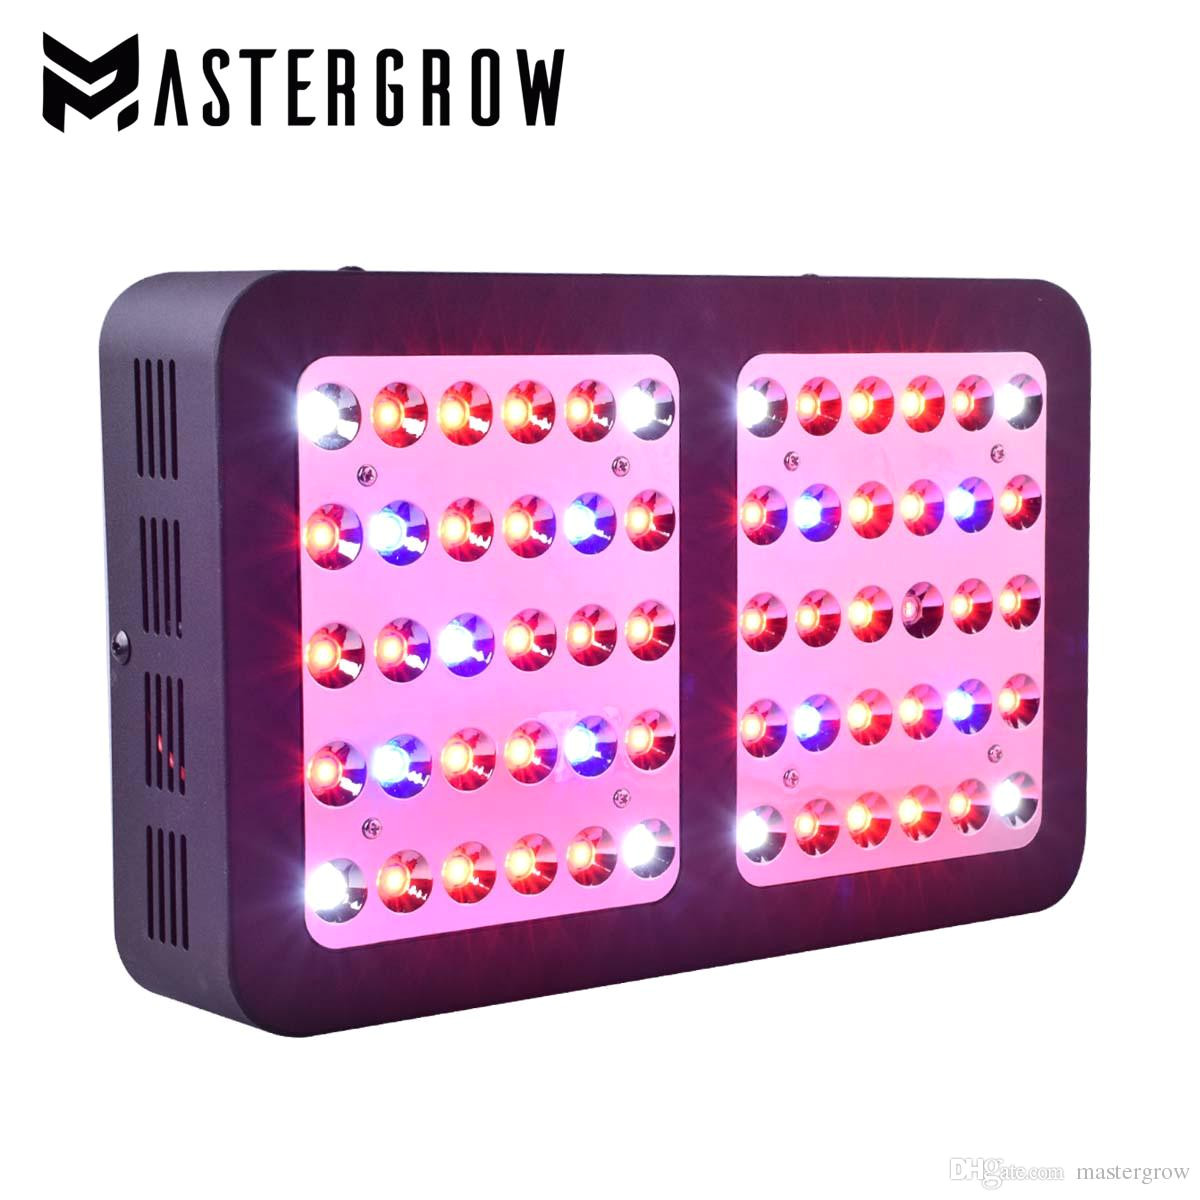 mastergrow 600w full spectrum led grow light with veg bloom modes for indoor greenhouse grow tent plants grow 1000 watt led grow lights lights for growing